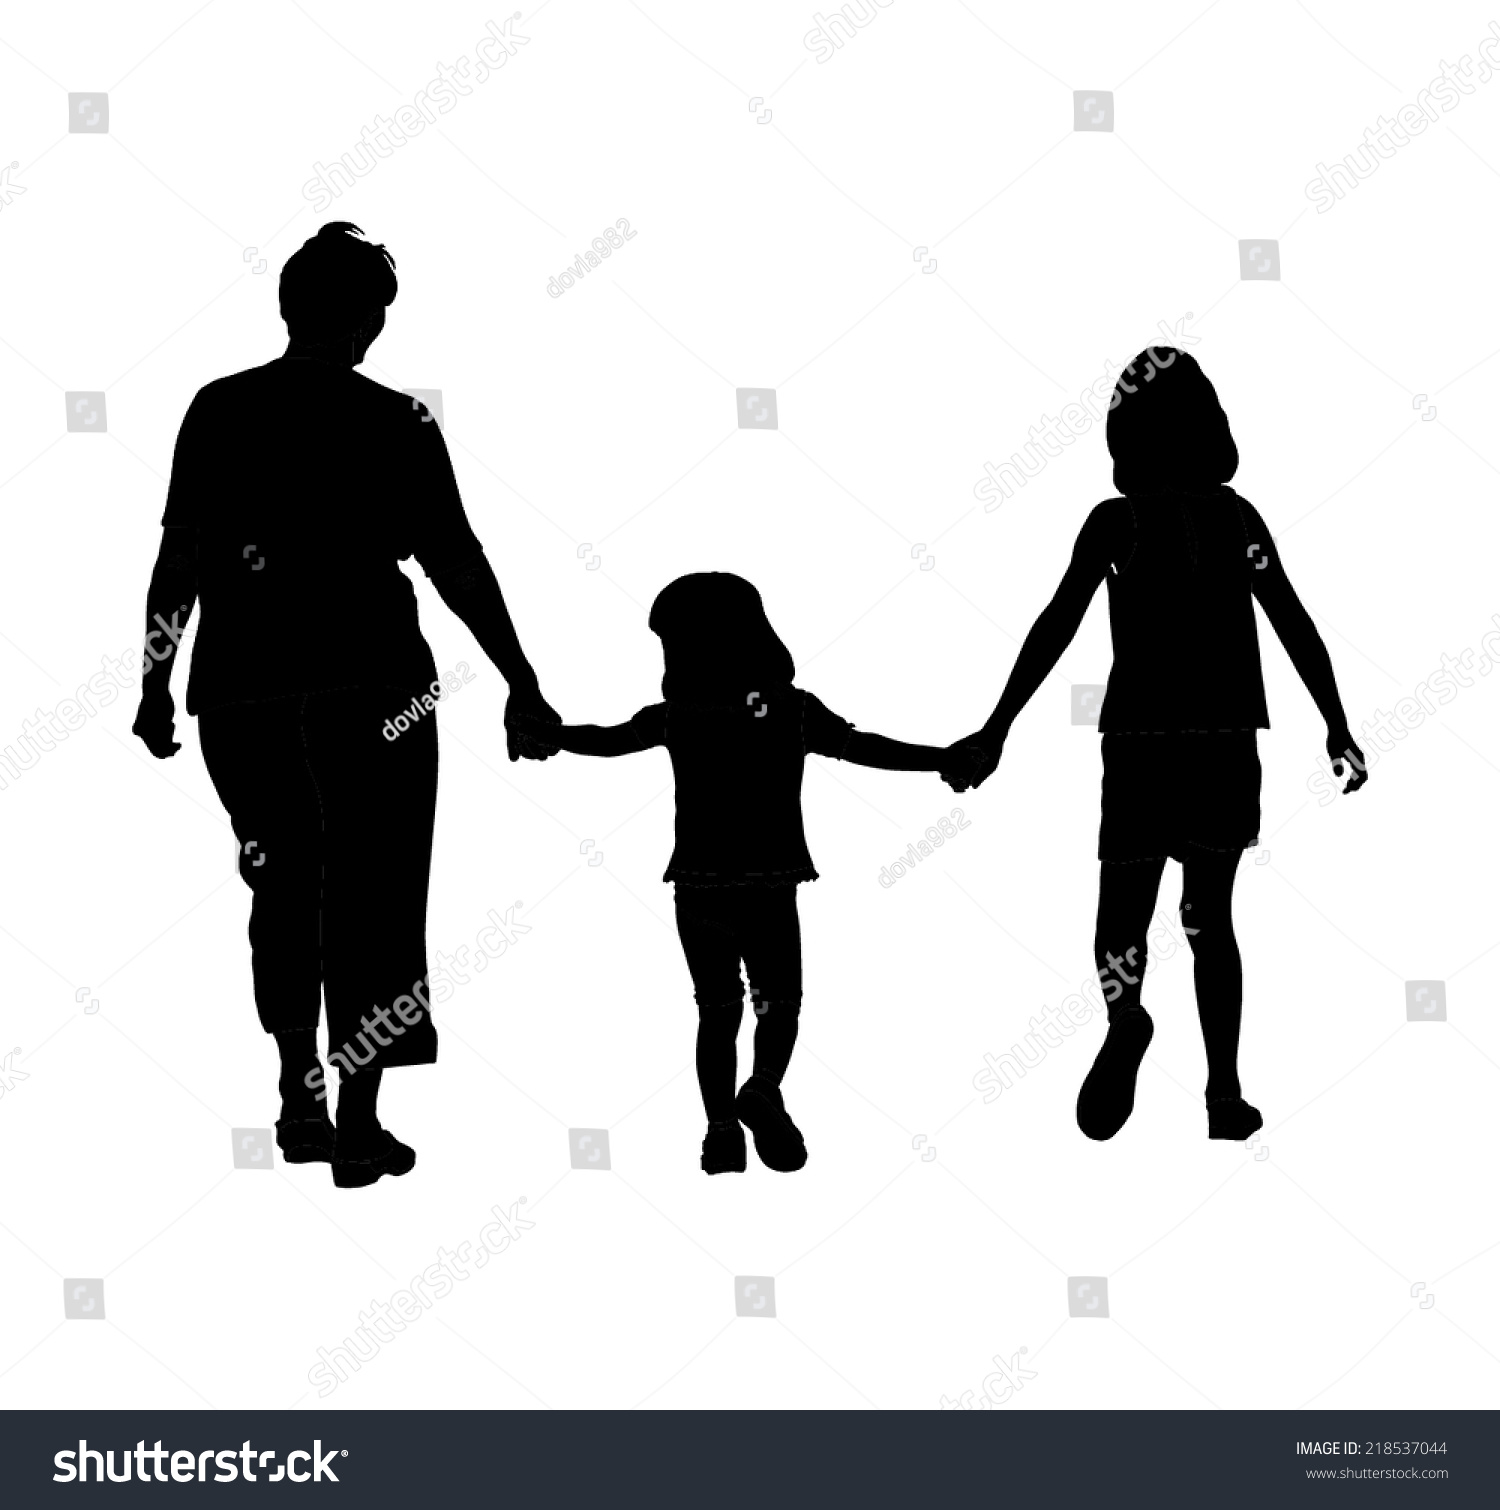 SVG of Grandmother with grandchildren walking in park vector silhouette illustration.On the way to school. svg